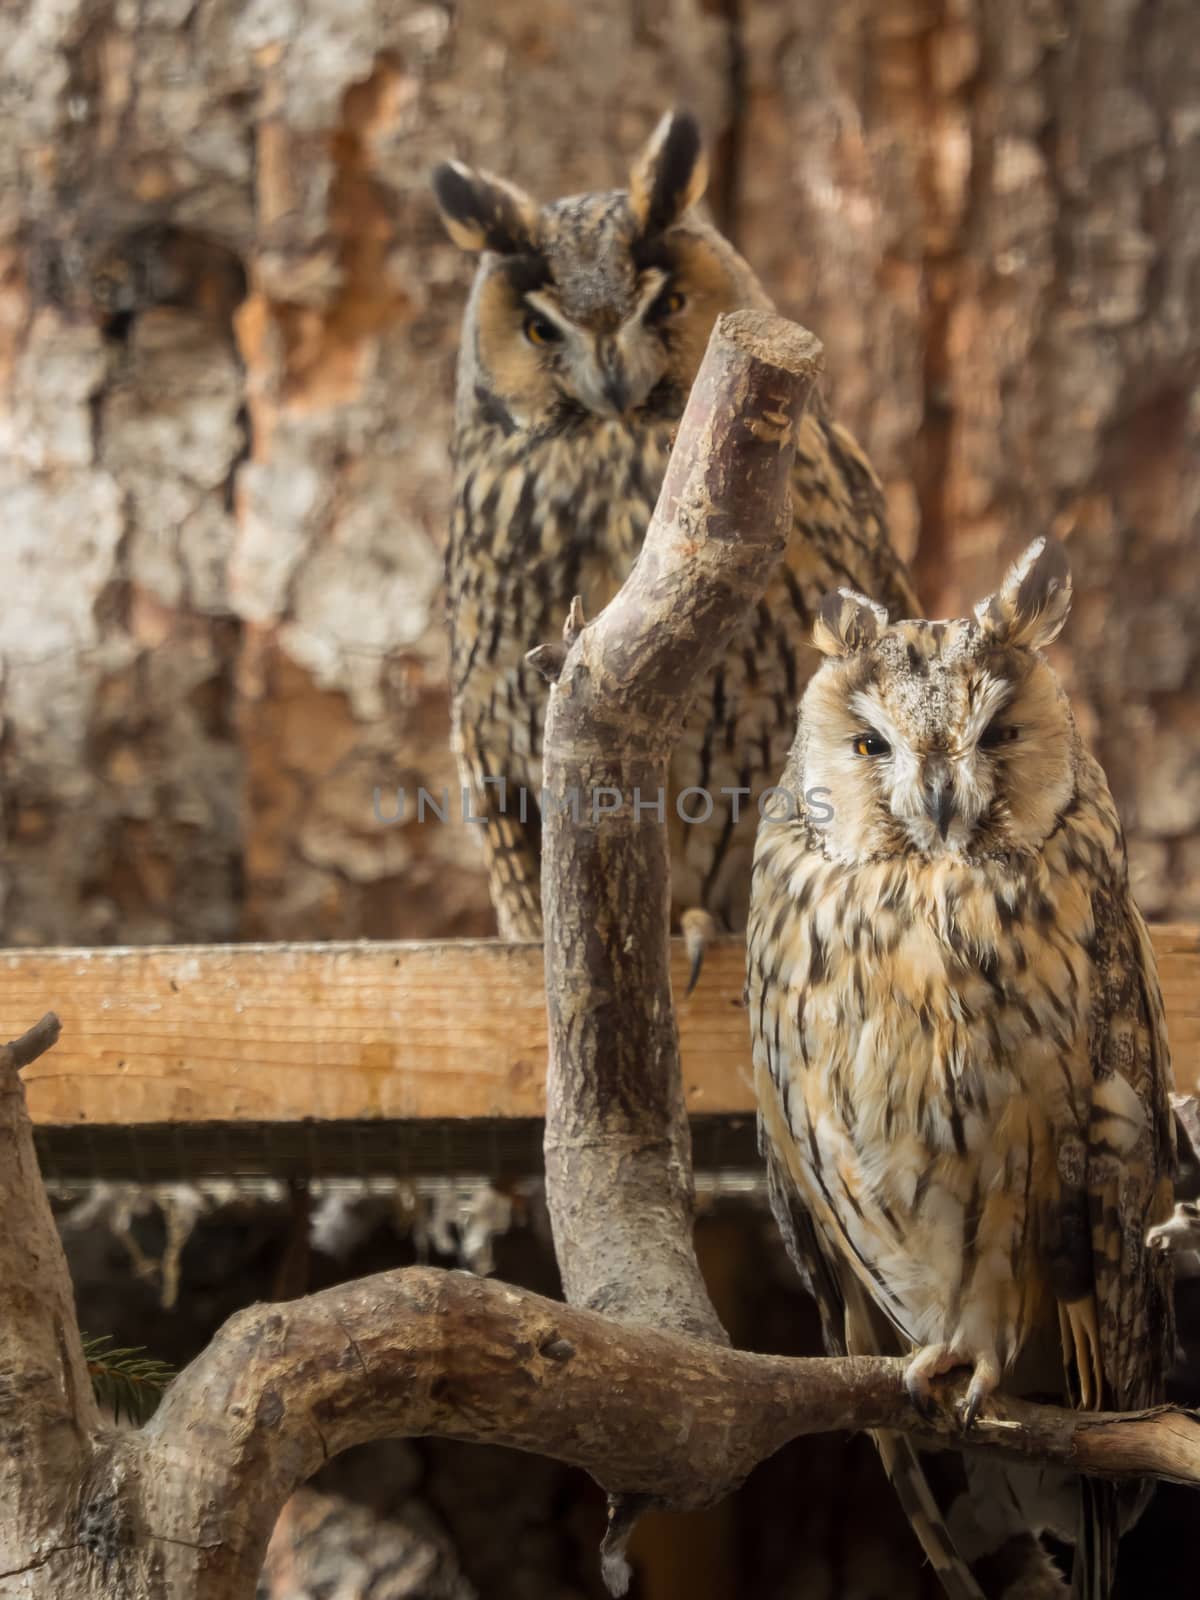 Long-eared owls sit on branches